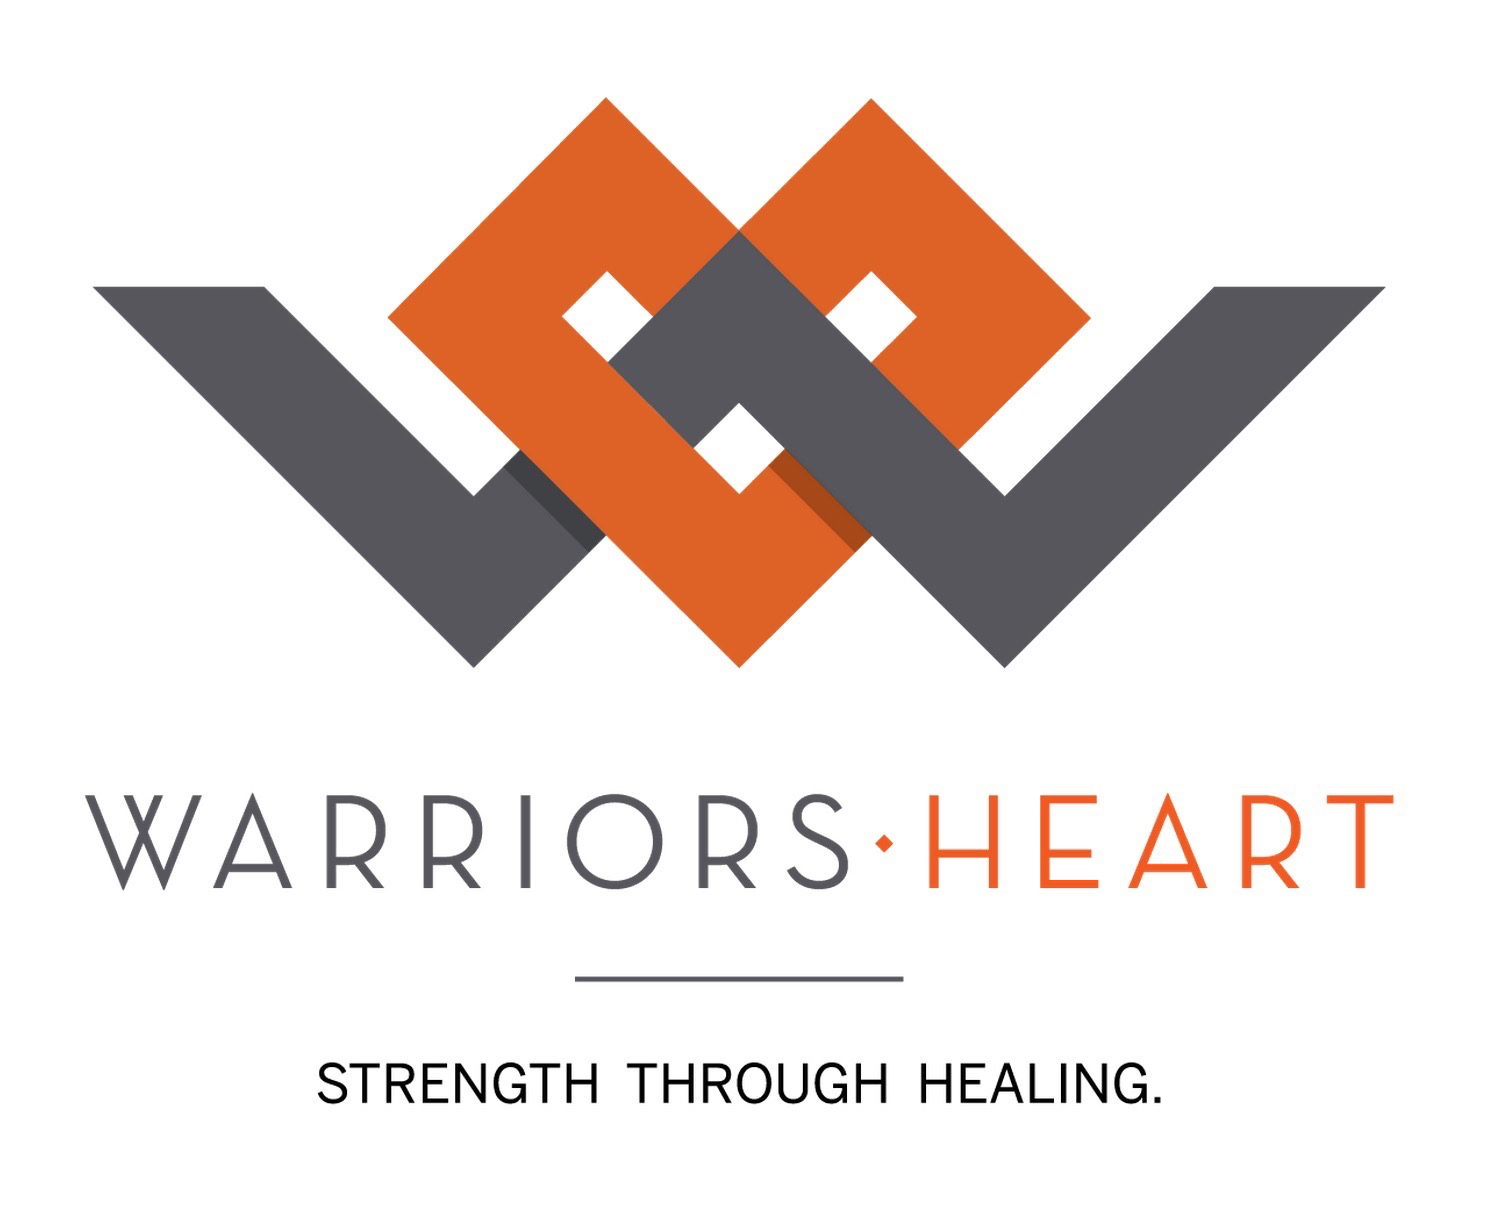 Warriors Heart provides the first and only private and accredited residential treatment program in the U.S. for “Warriors Only” (military, veterans, first responders, and EMTs/paramedics).